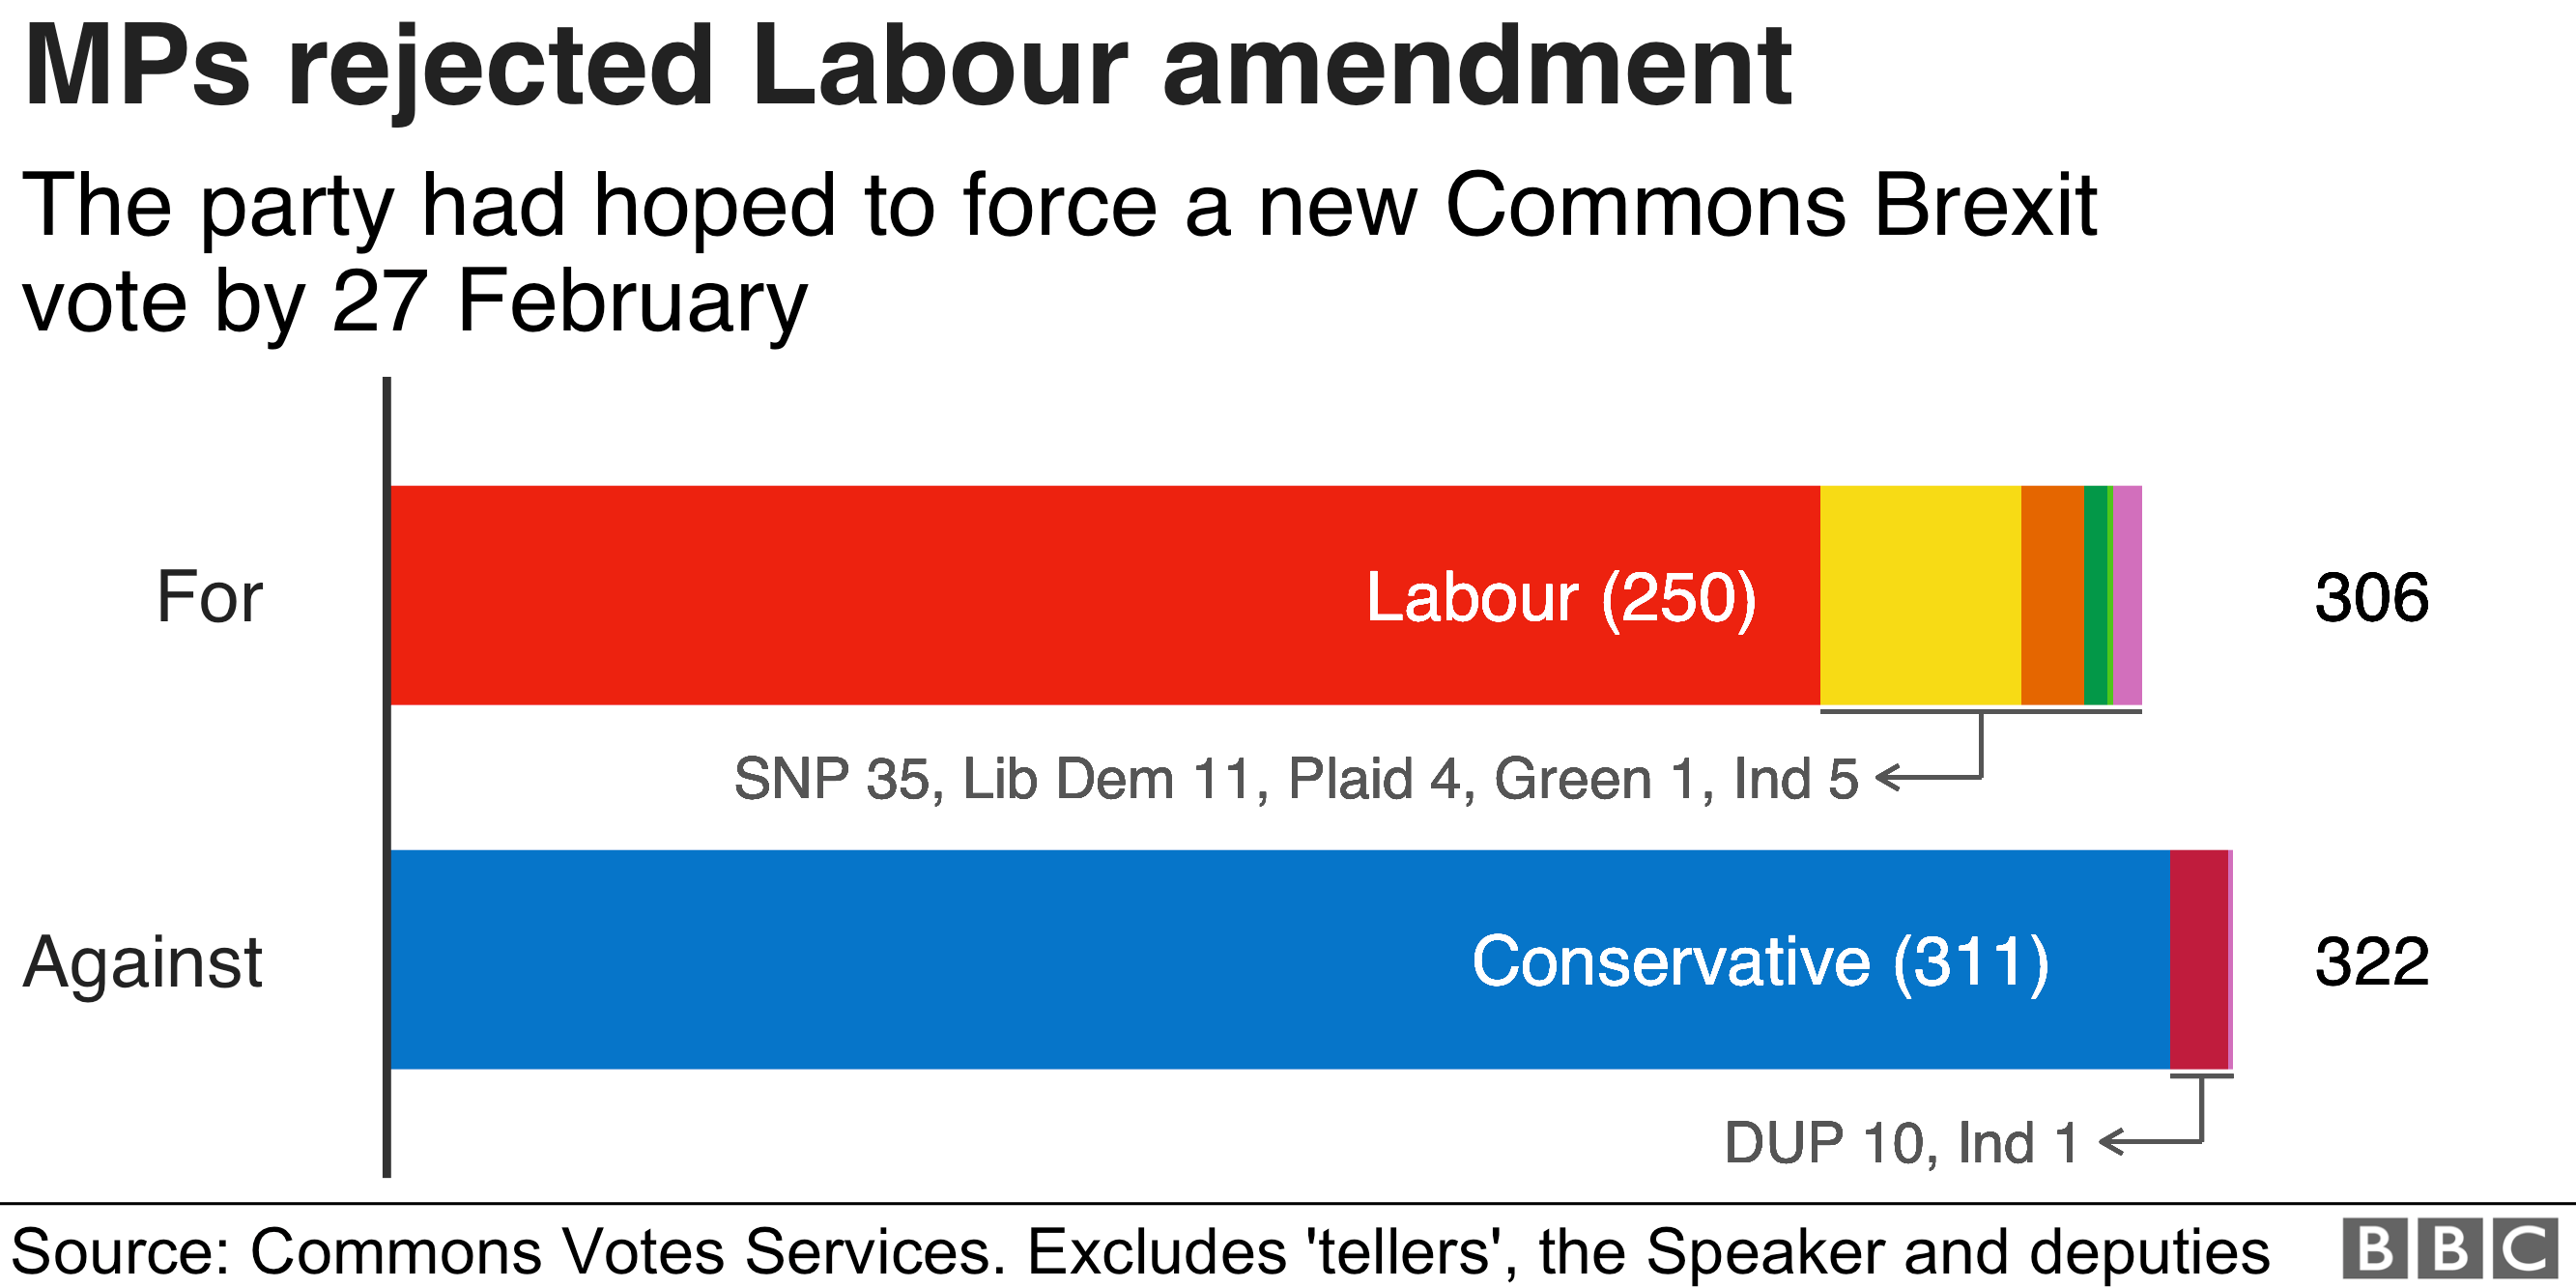 MPs reject Labour's amendment to force a new Commons vote on Brexit by the 27th Feb by 306 to 322